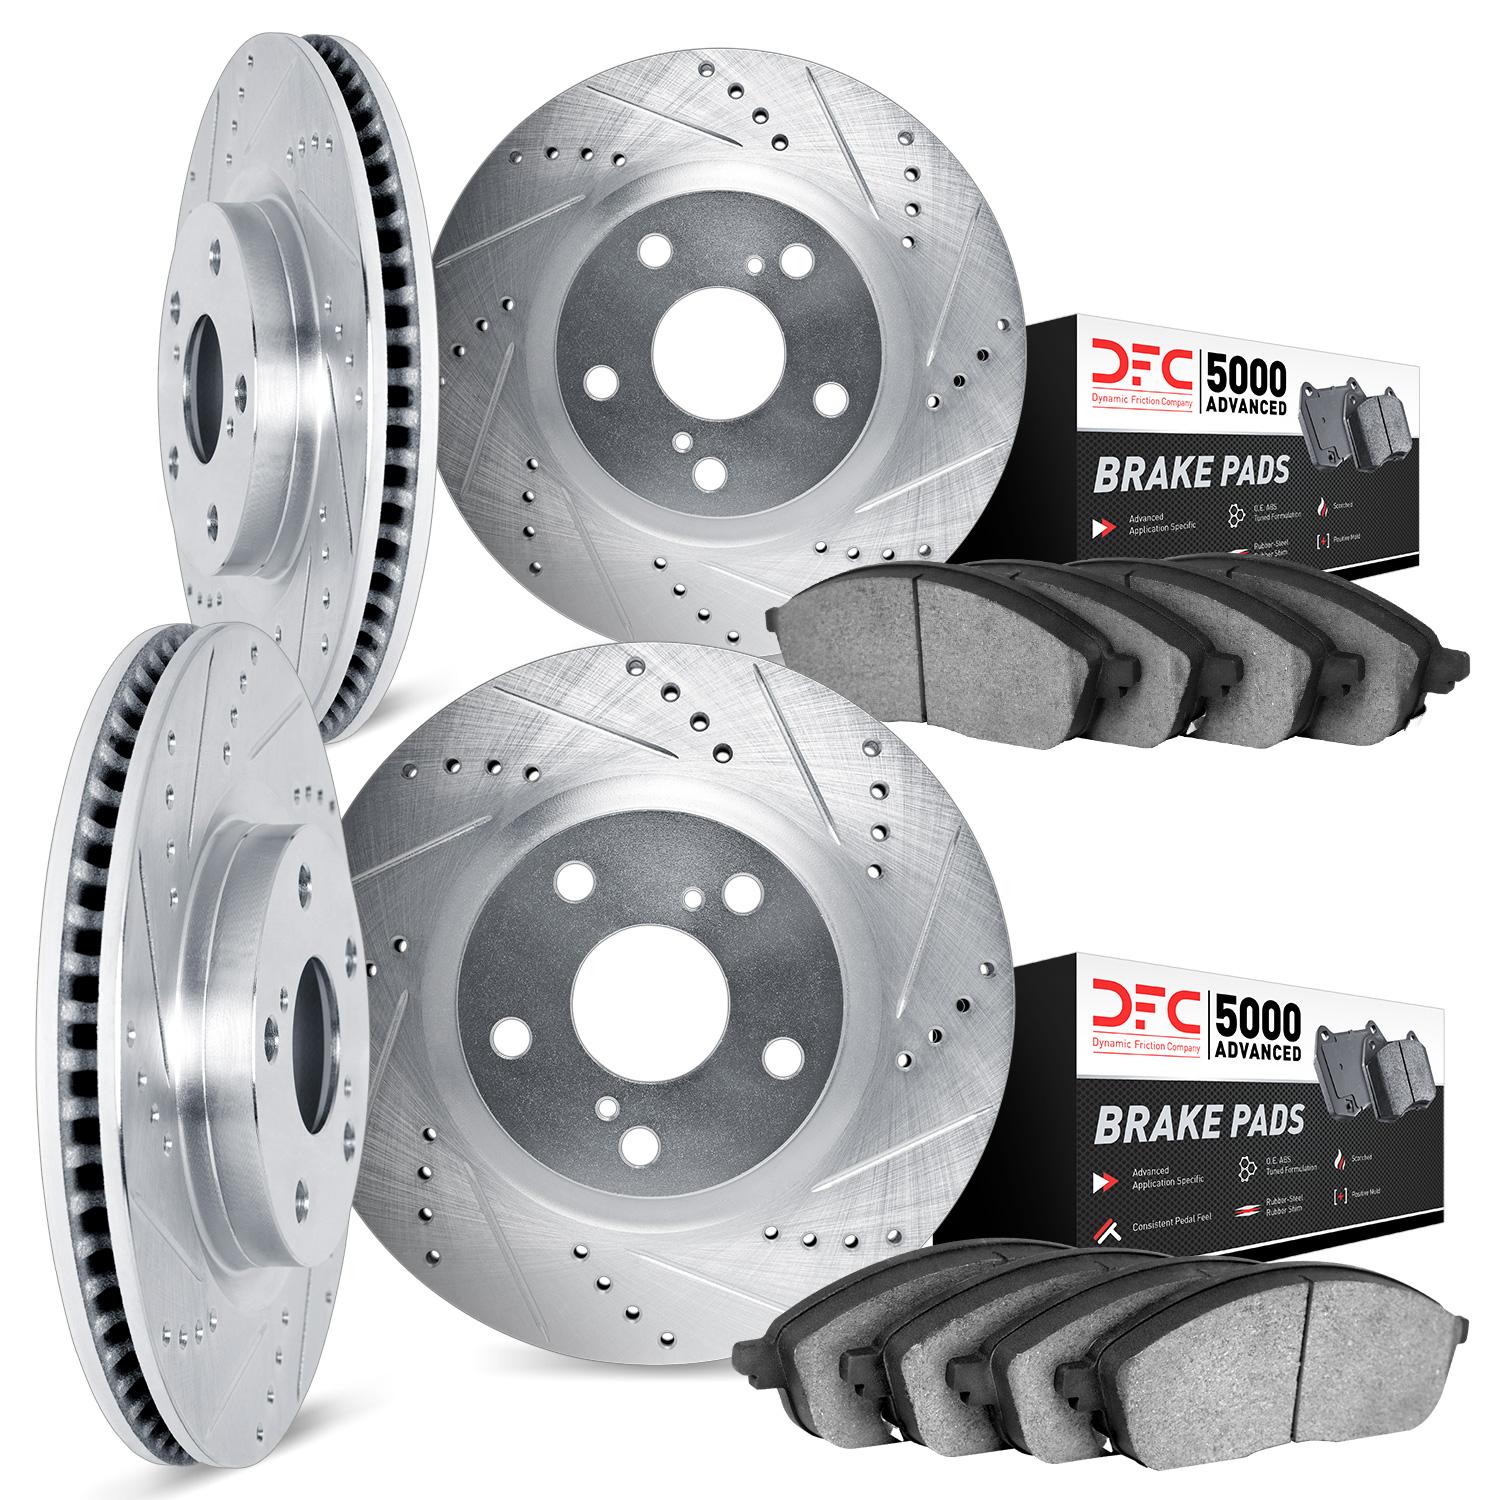 7504-54261 Drilled/Slotted Brake Rotors w/5000 Advanced Brake Pads Kit [Silver], 1986-1989 Ford/Lincoln/Mercury/Mazda, Position: